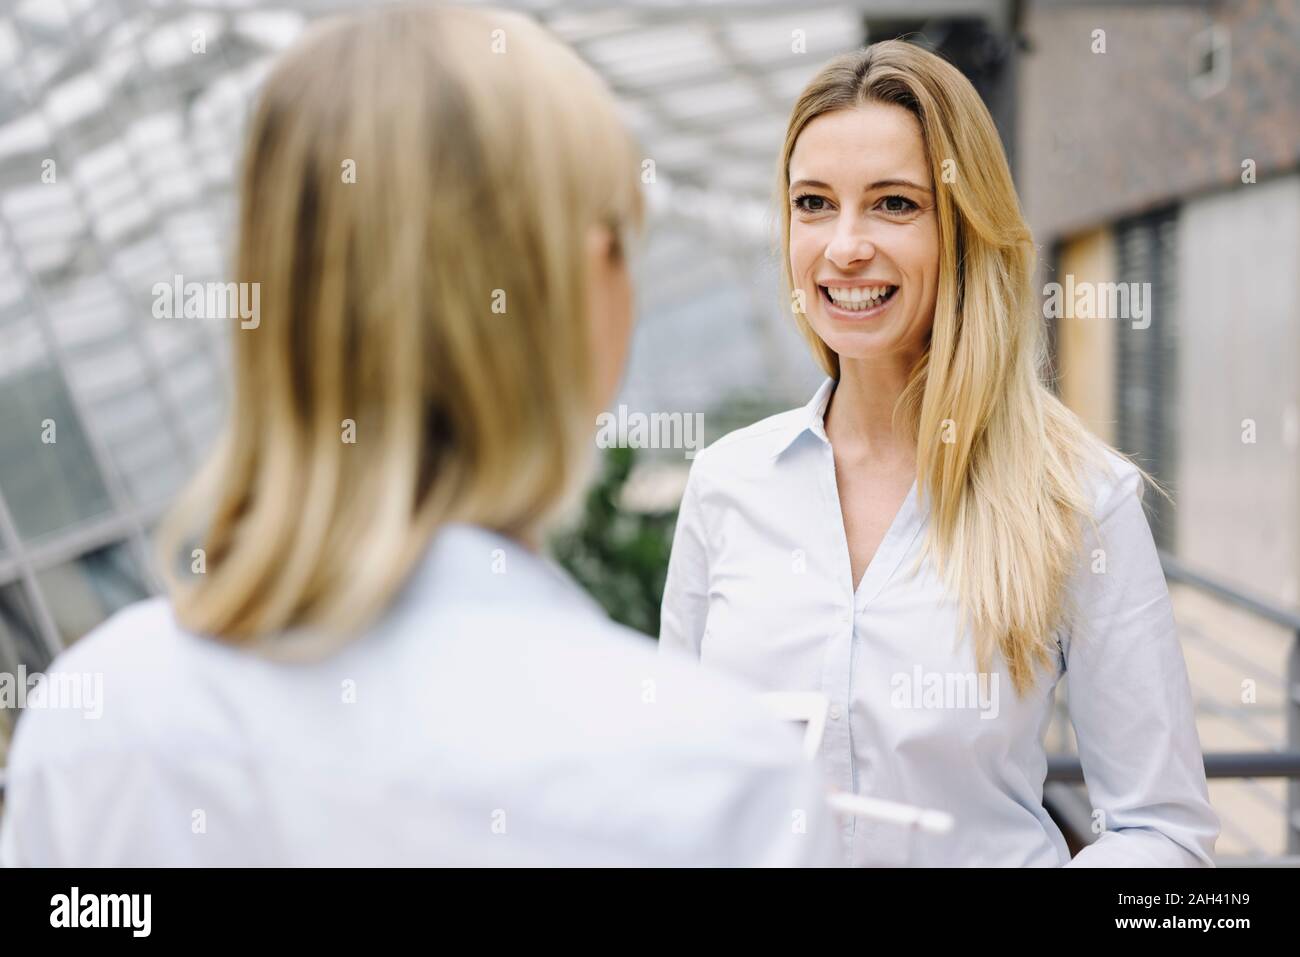 Portrait of young businesswoman smiling at colleague in office Stock Photo